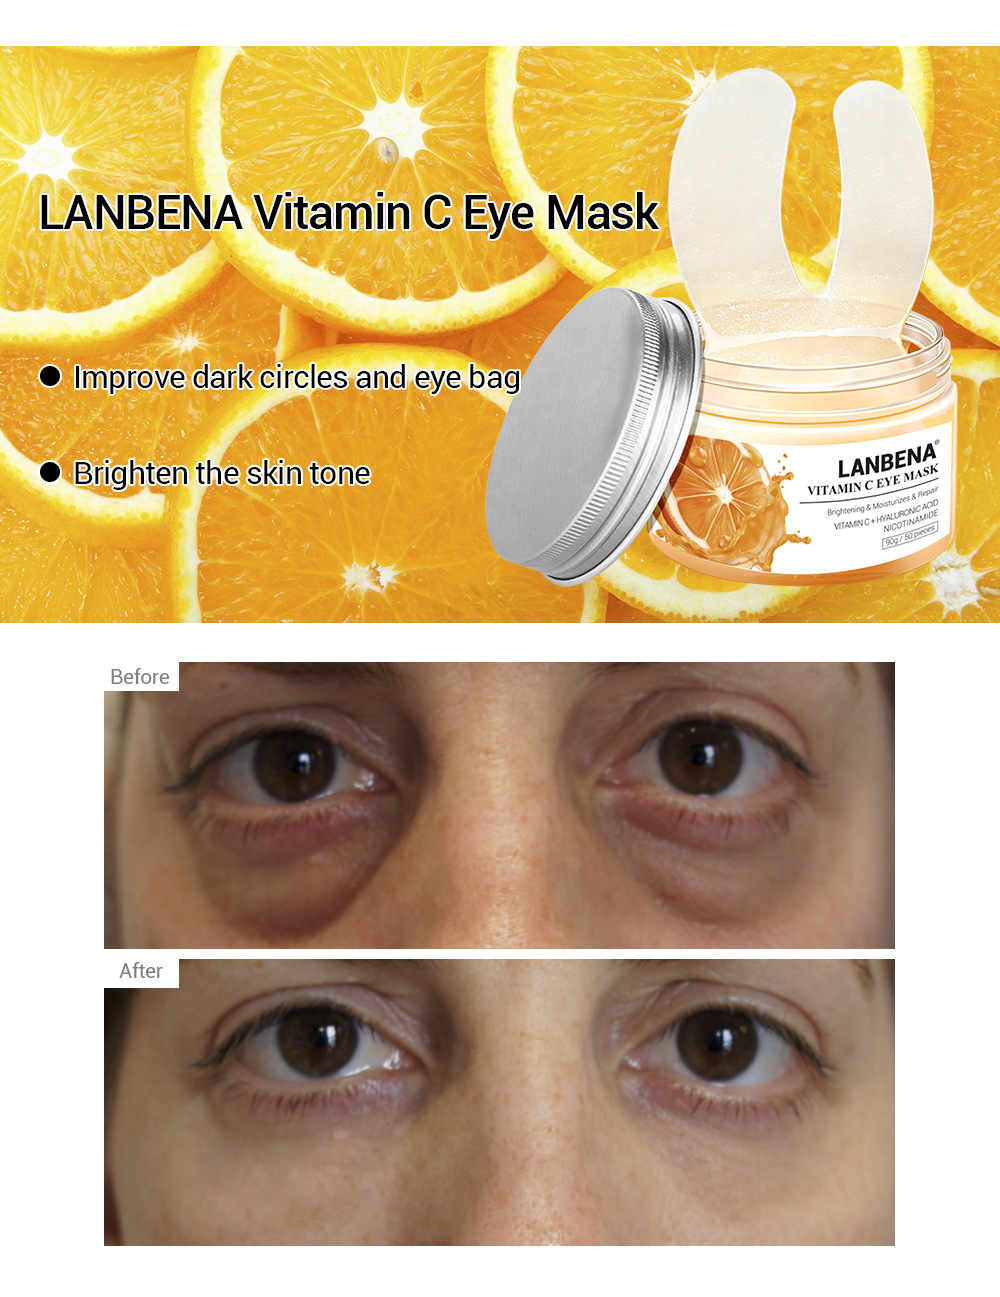 Functional-Eye-Mask-Soothes-Wrinkles-Removes-Edema-Anti-Aging-Lifts-Tightens-Eye-Mask-1537425-5